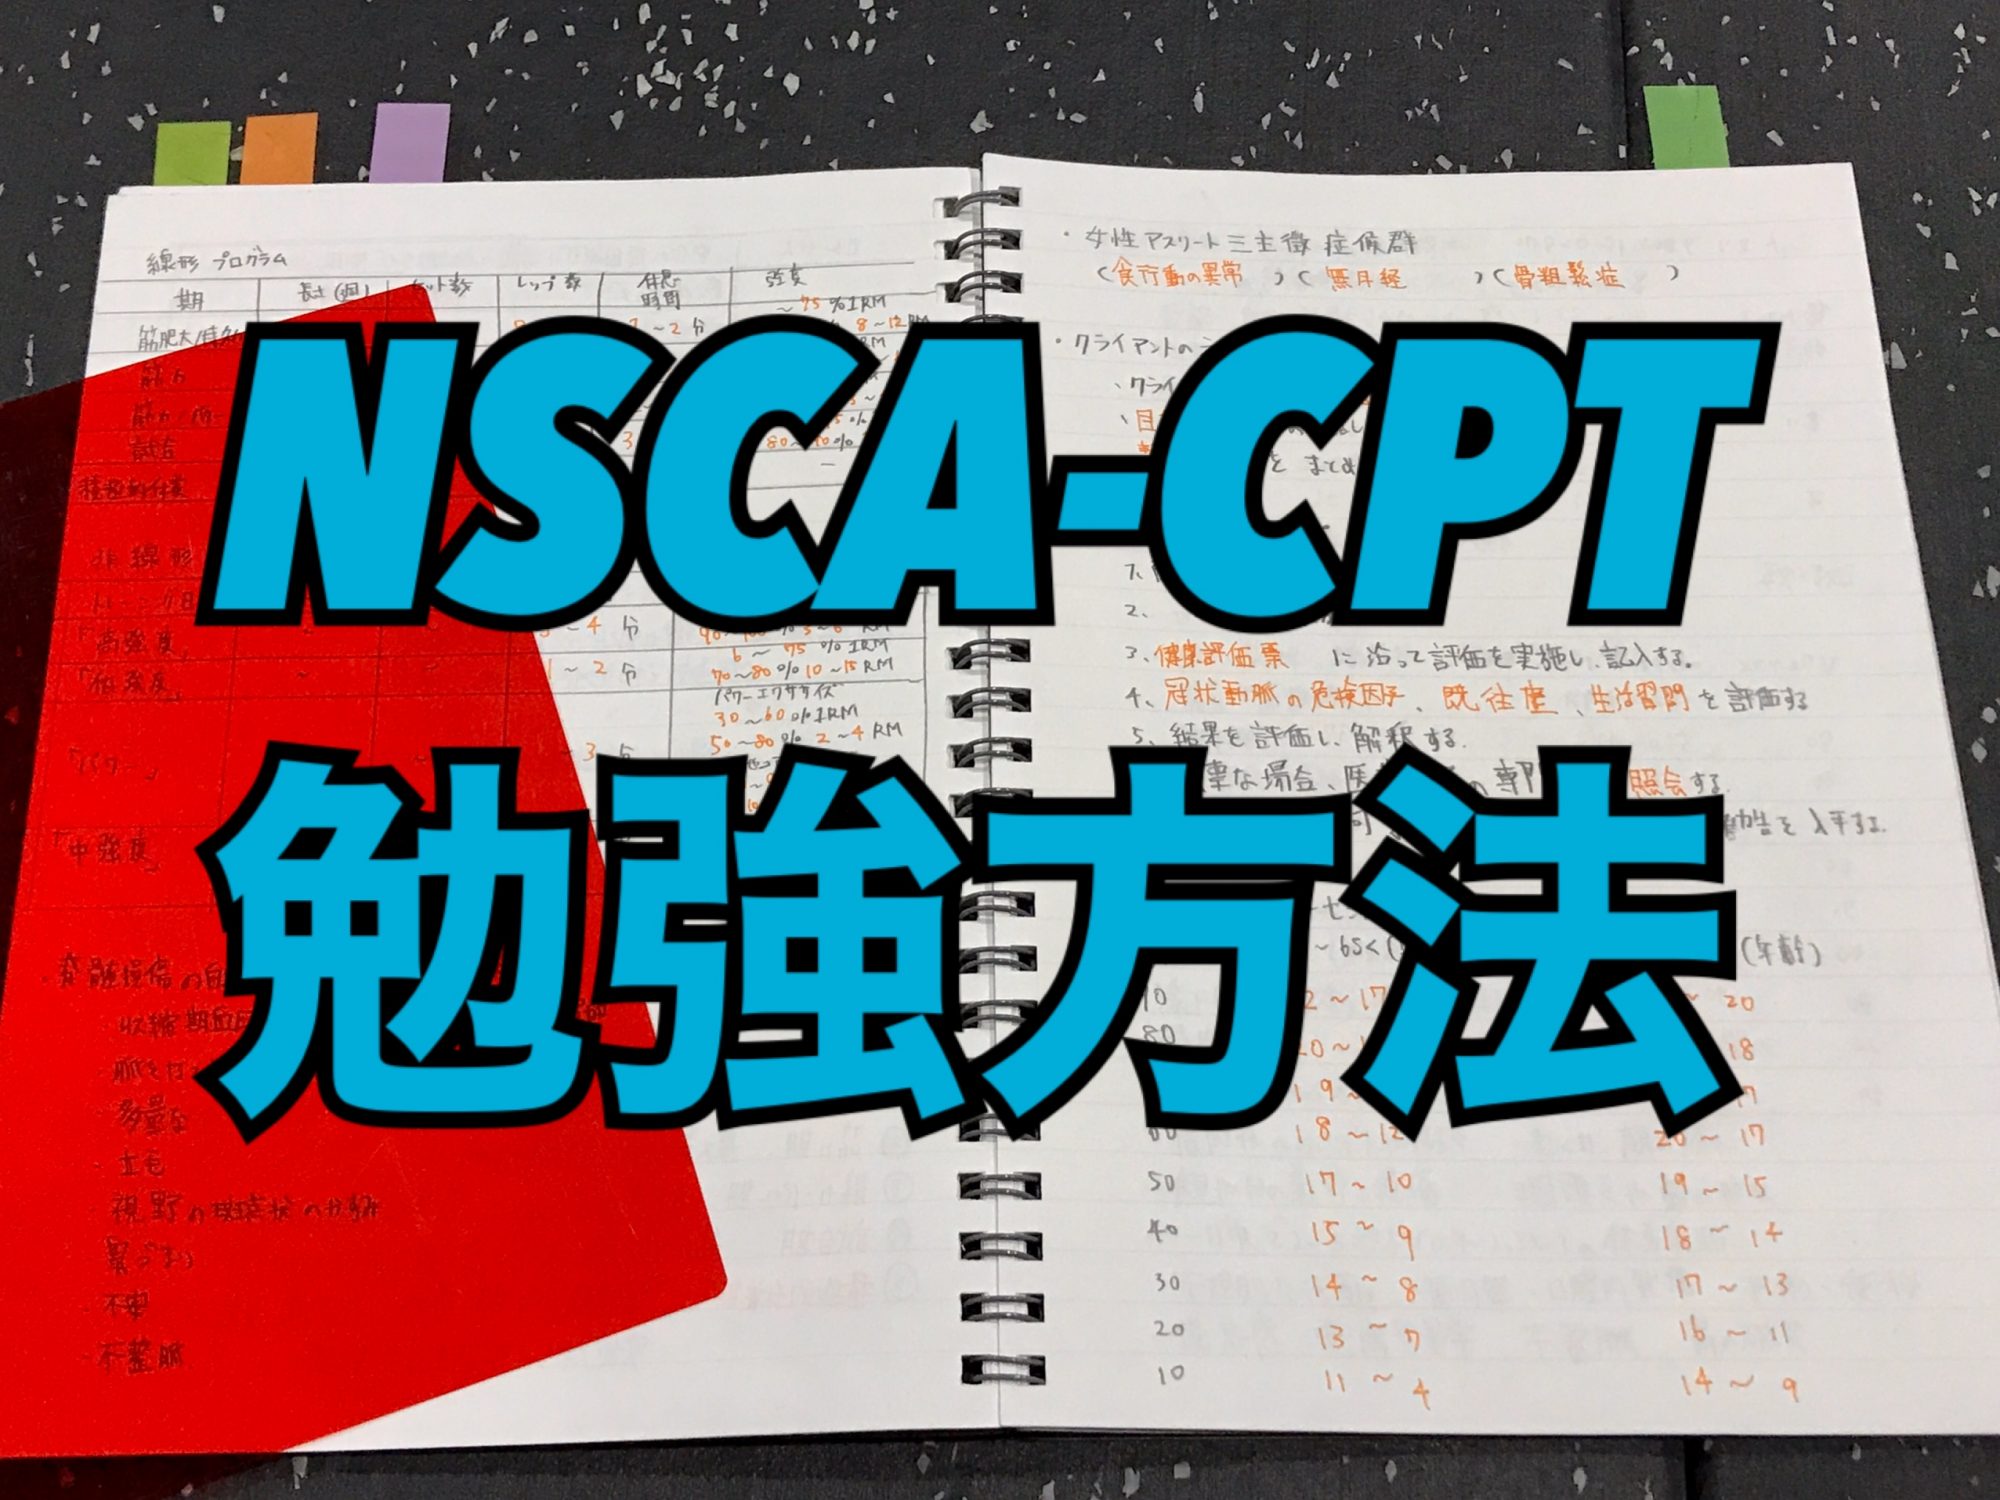 NSCA-CPT 教科書